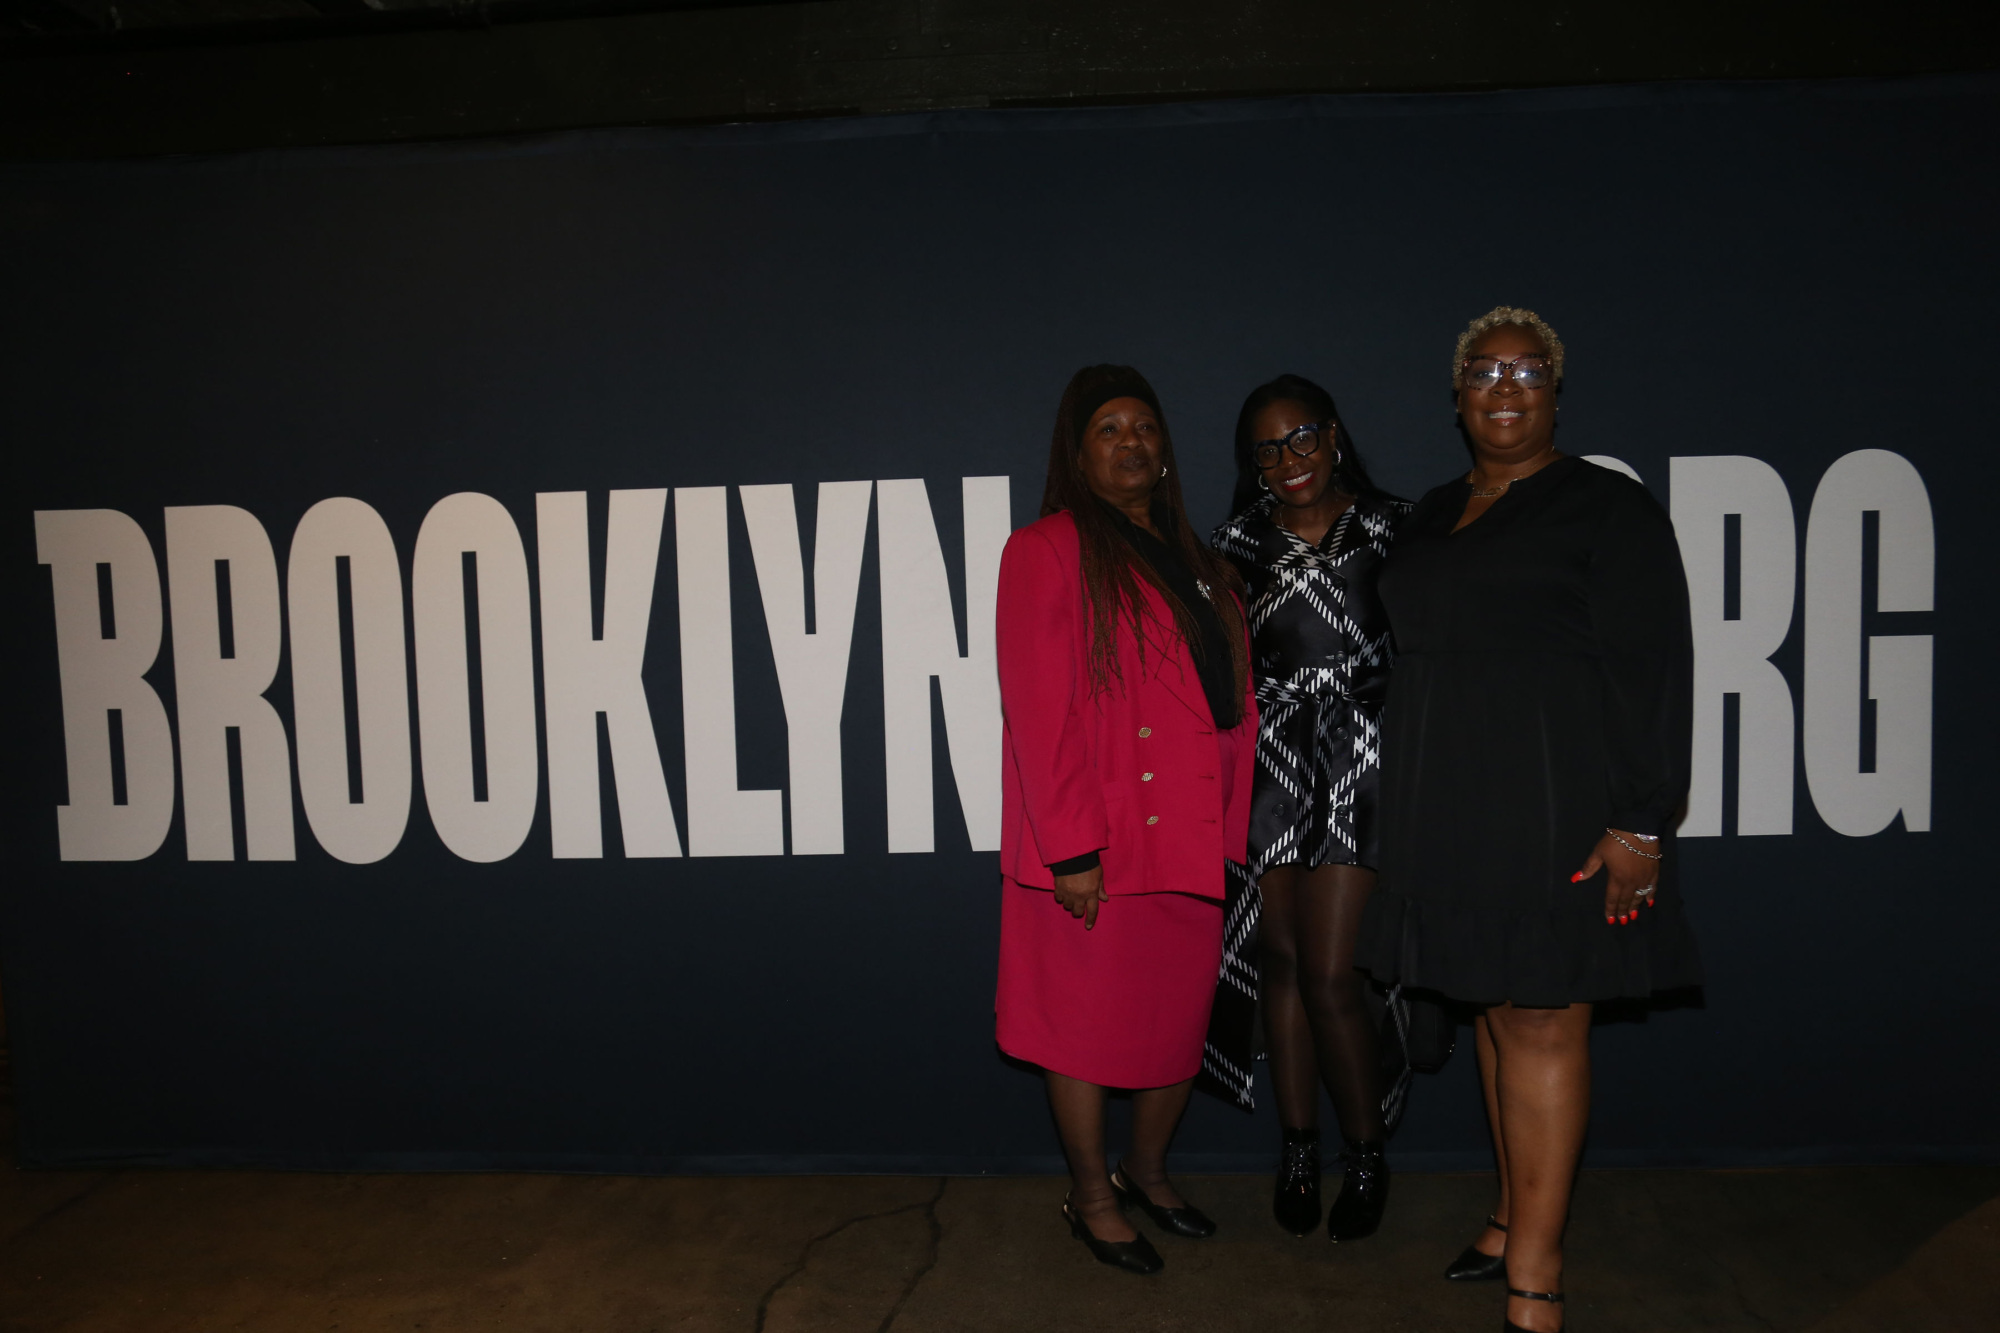 Three women standing in front of the brooklyn bg sign.